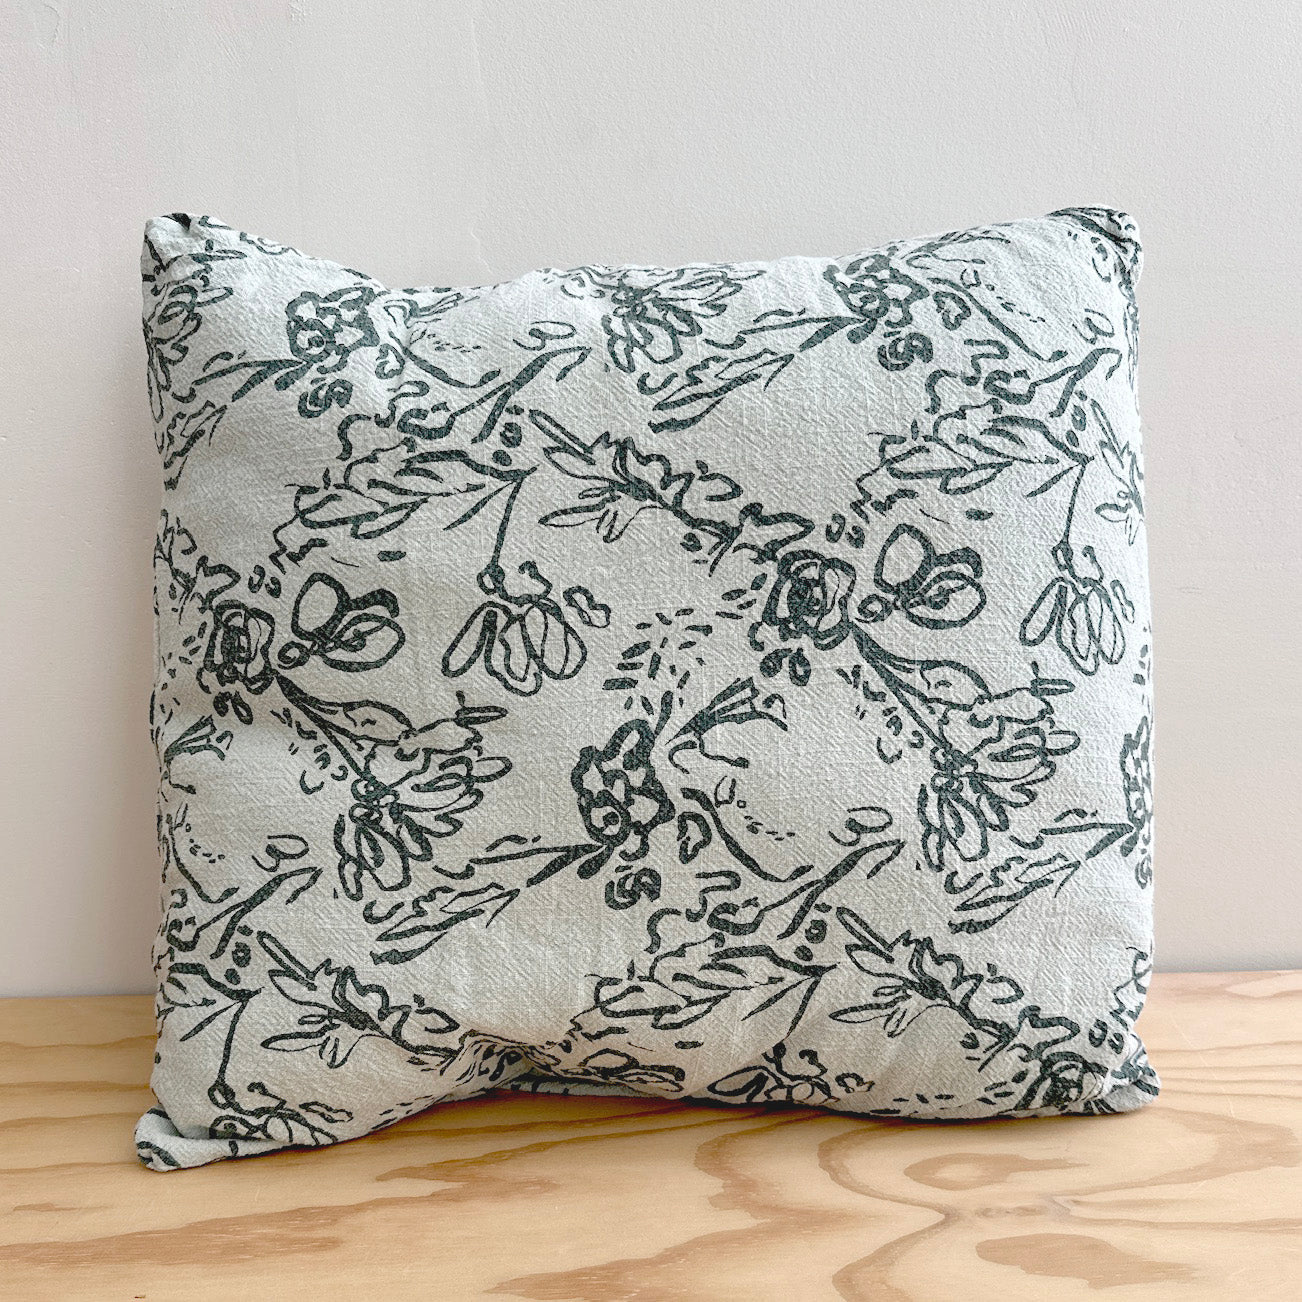 The Square Throw Pillow - Lattice in Pine and Sage